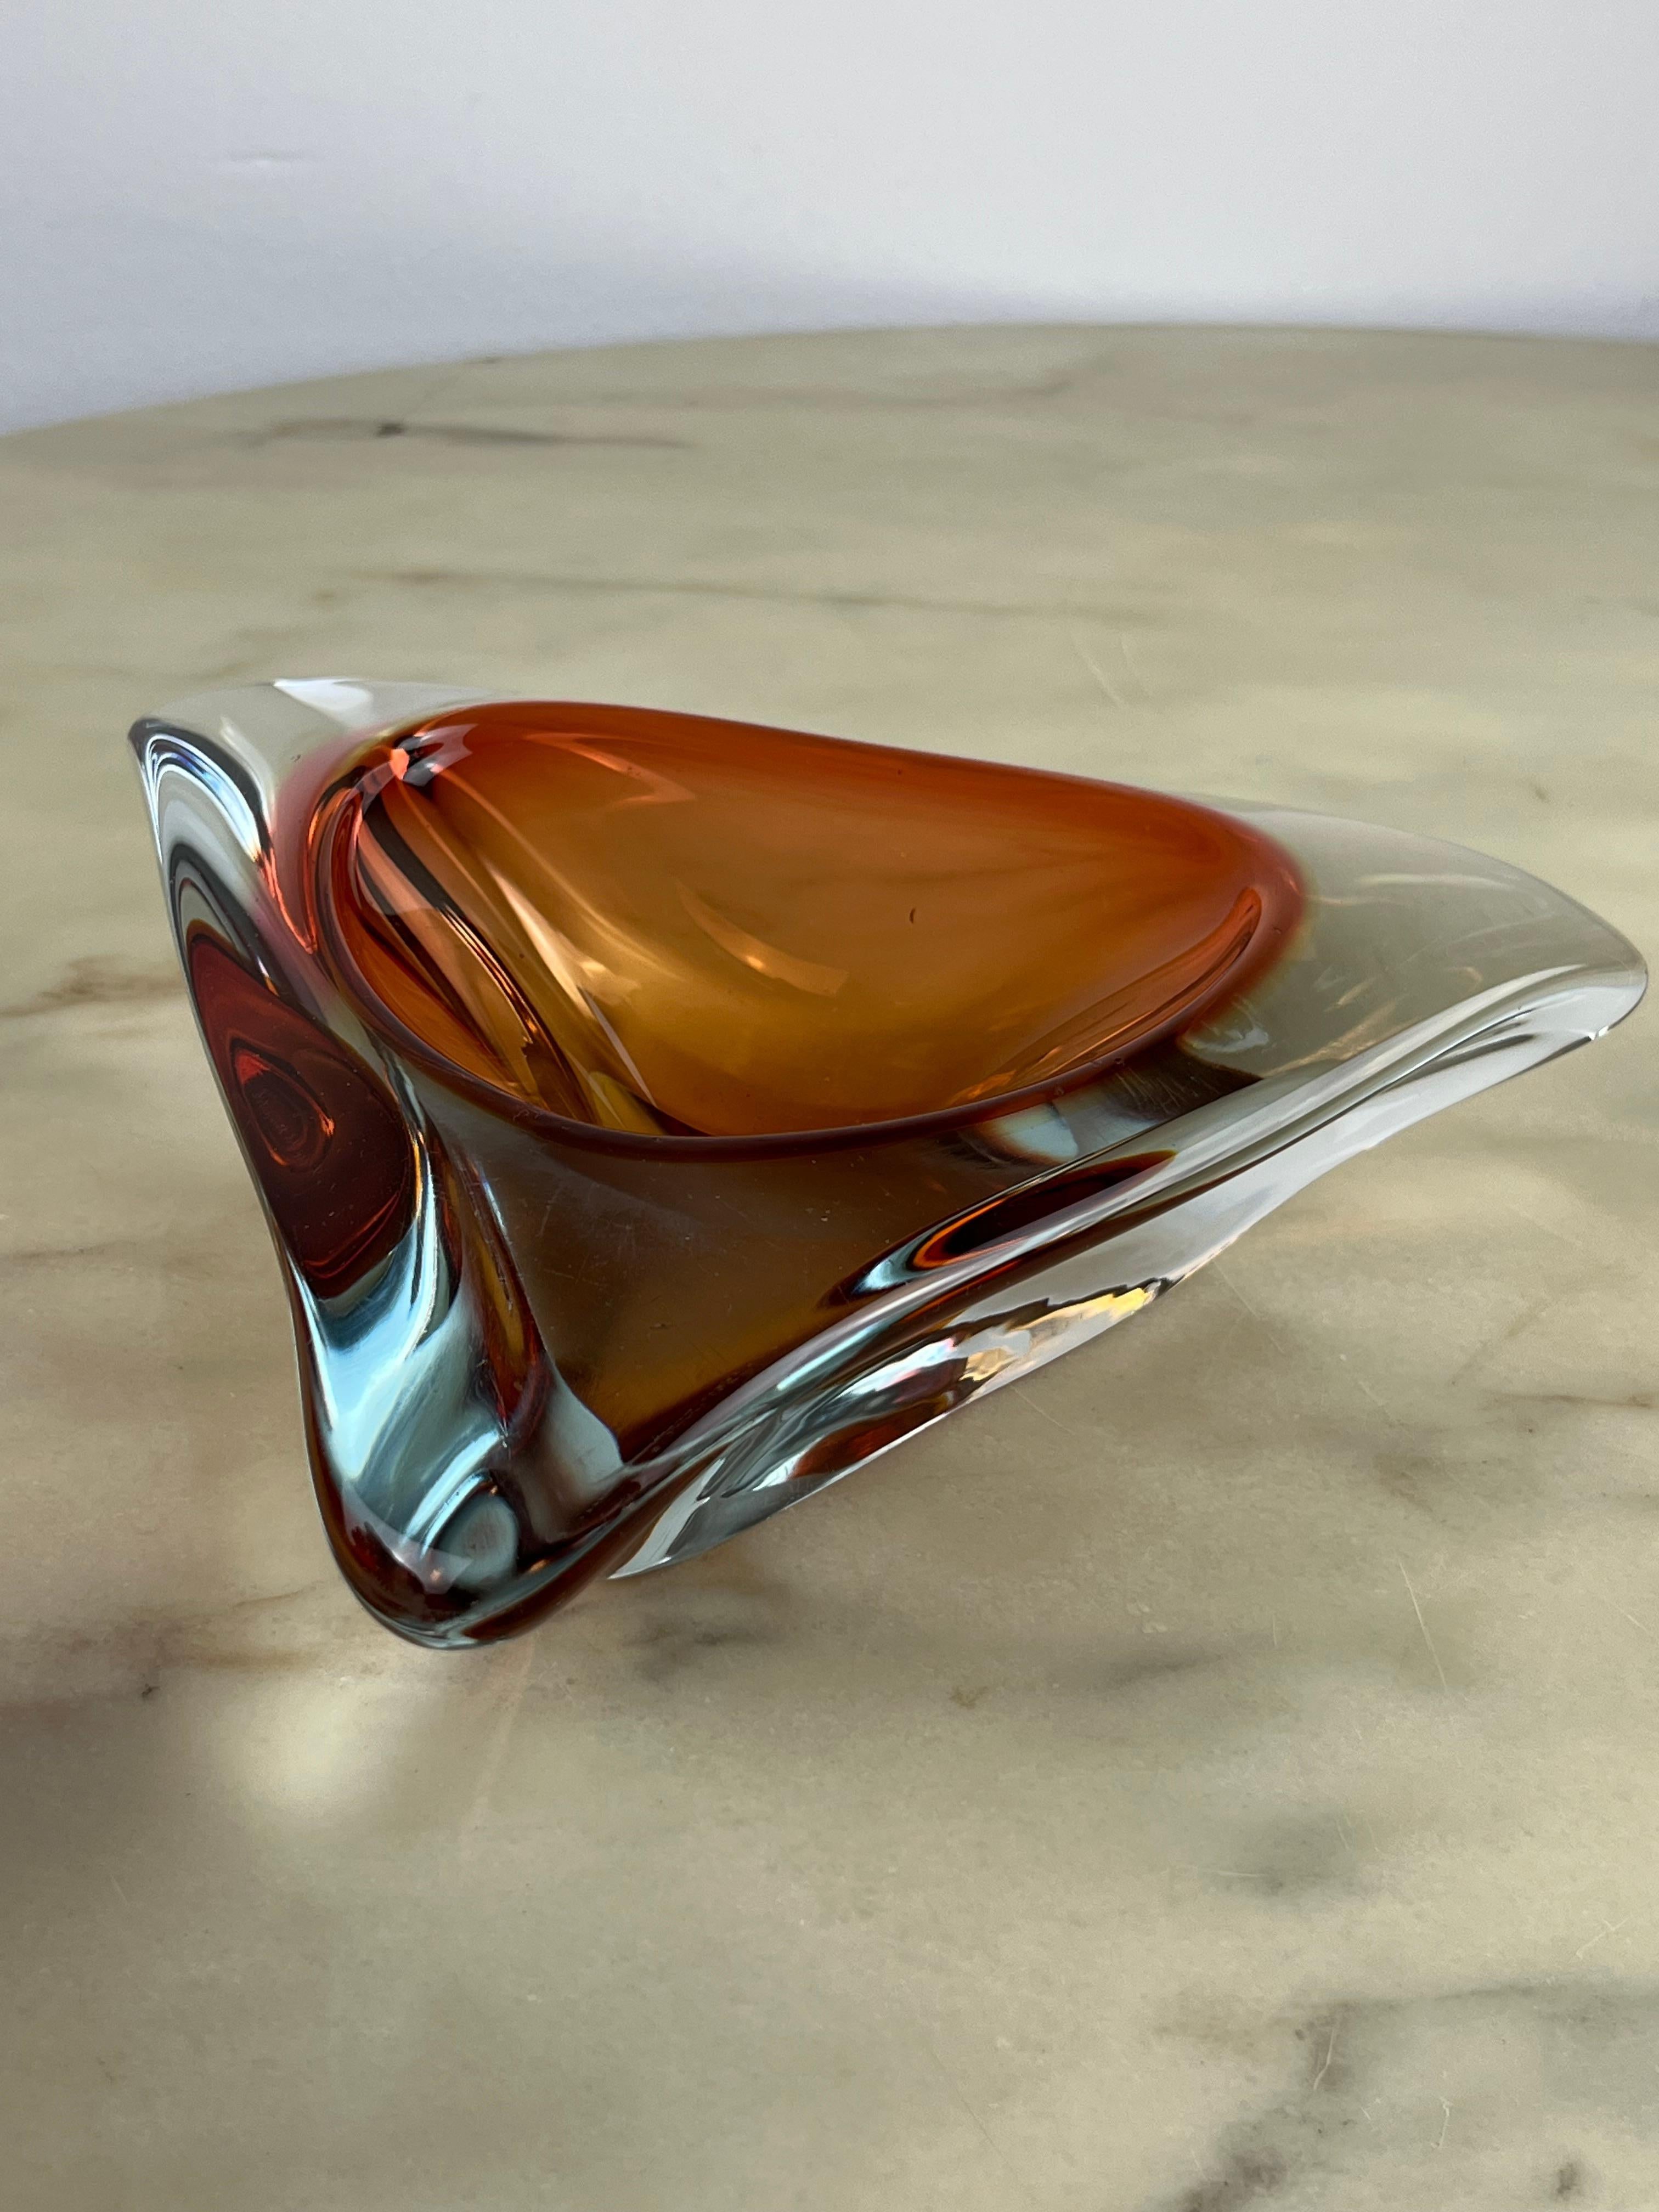 Submerged glass ashtray from Murano, Italy, 1970s, it was purchased by my great-grandfather in Venice.
Small signs of age. A chip is highlighted by one of the descriptive photographs.
Very rare object to find today.
